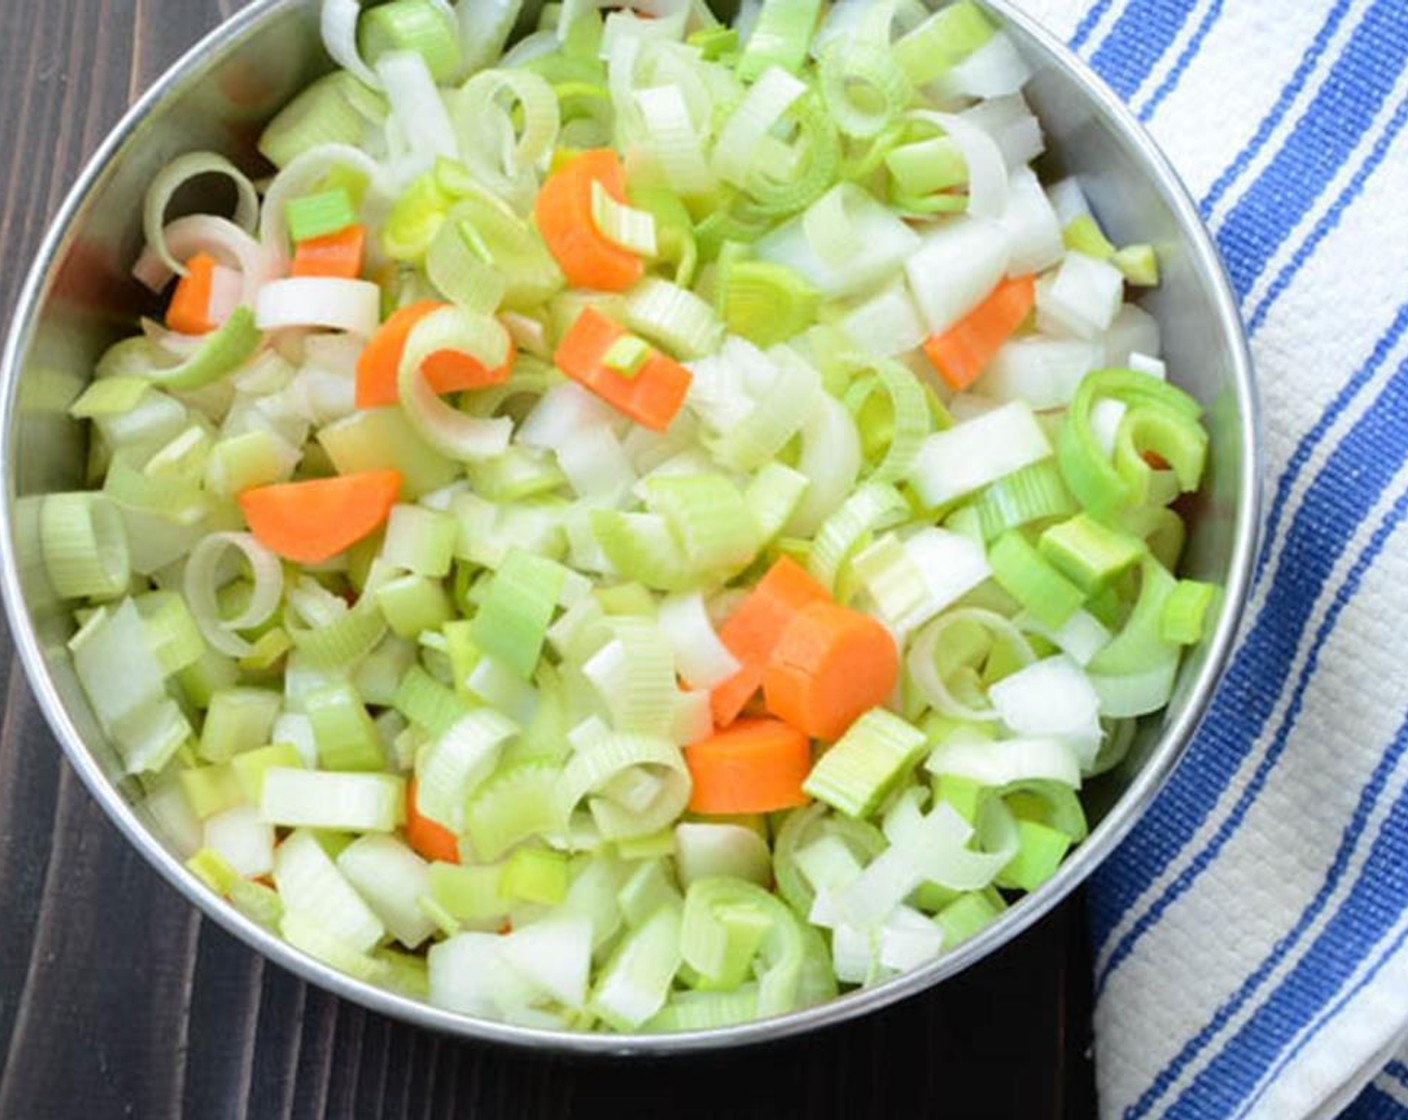 step 5 Chop the Celery (2 stalks) and Carrots (3) into half-inch dice. Clean Leek (1) of any grit, slice in half lengthwise and cut into half-inch Onion (1) into half moon slices.